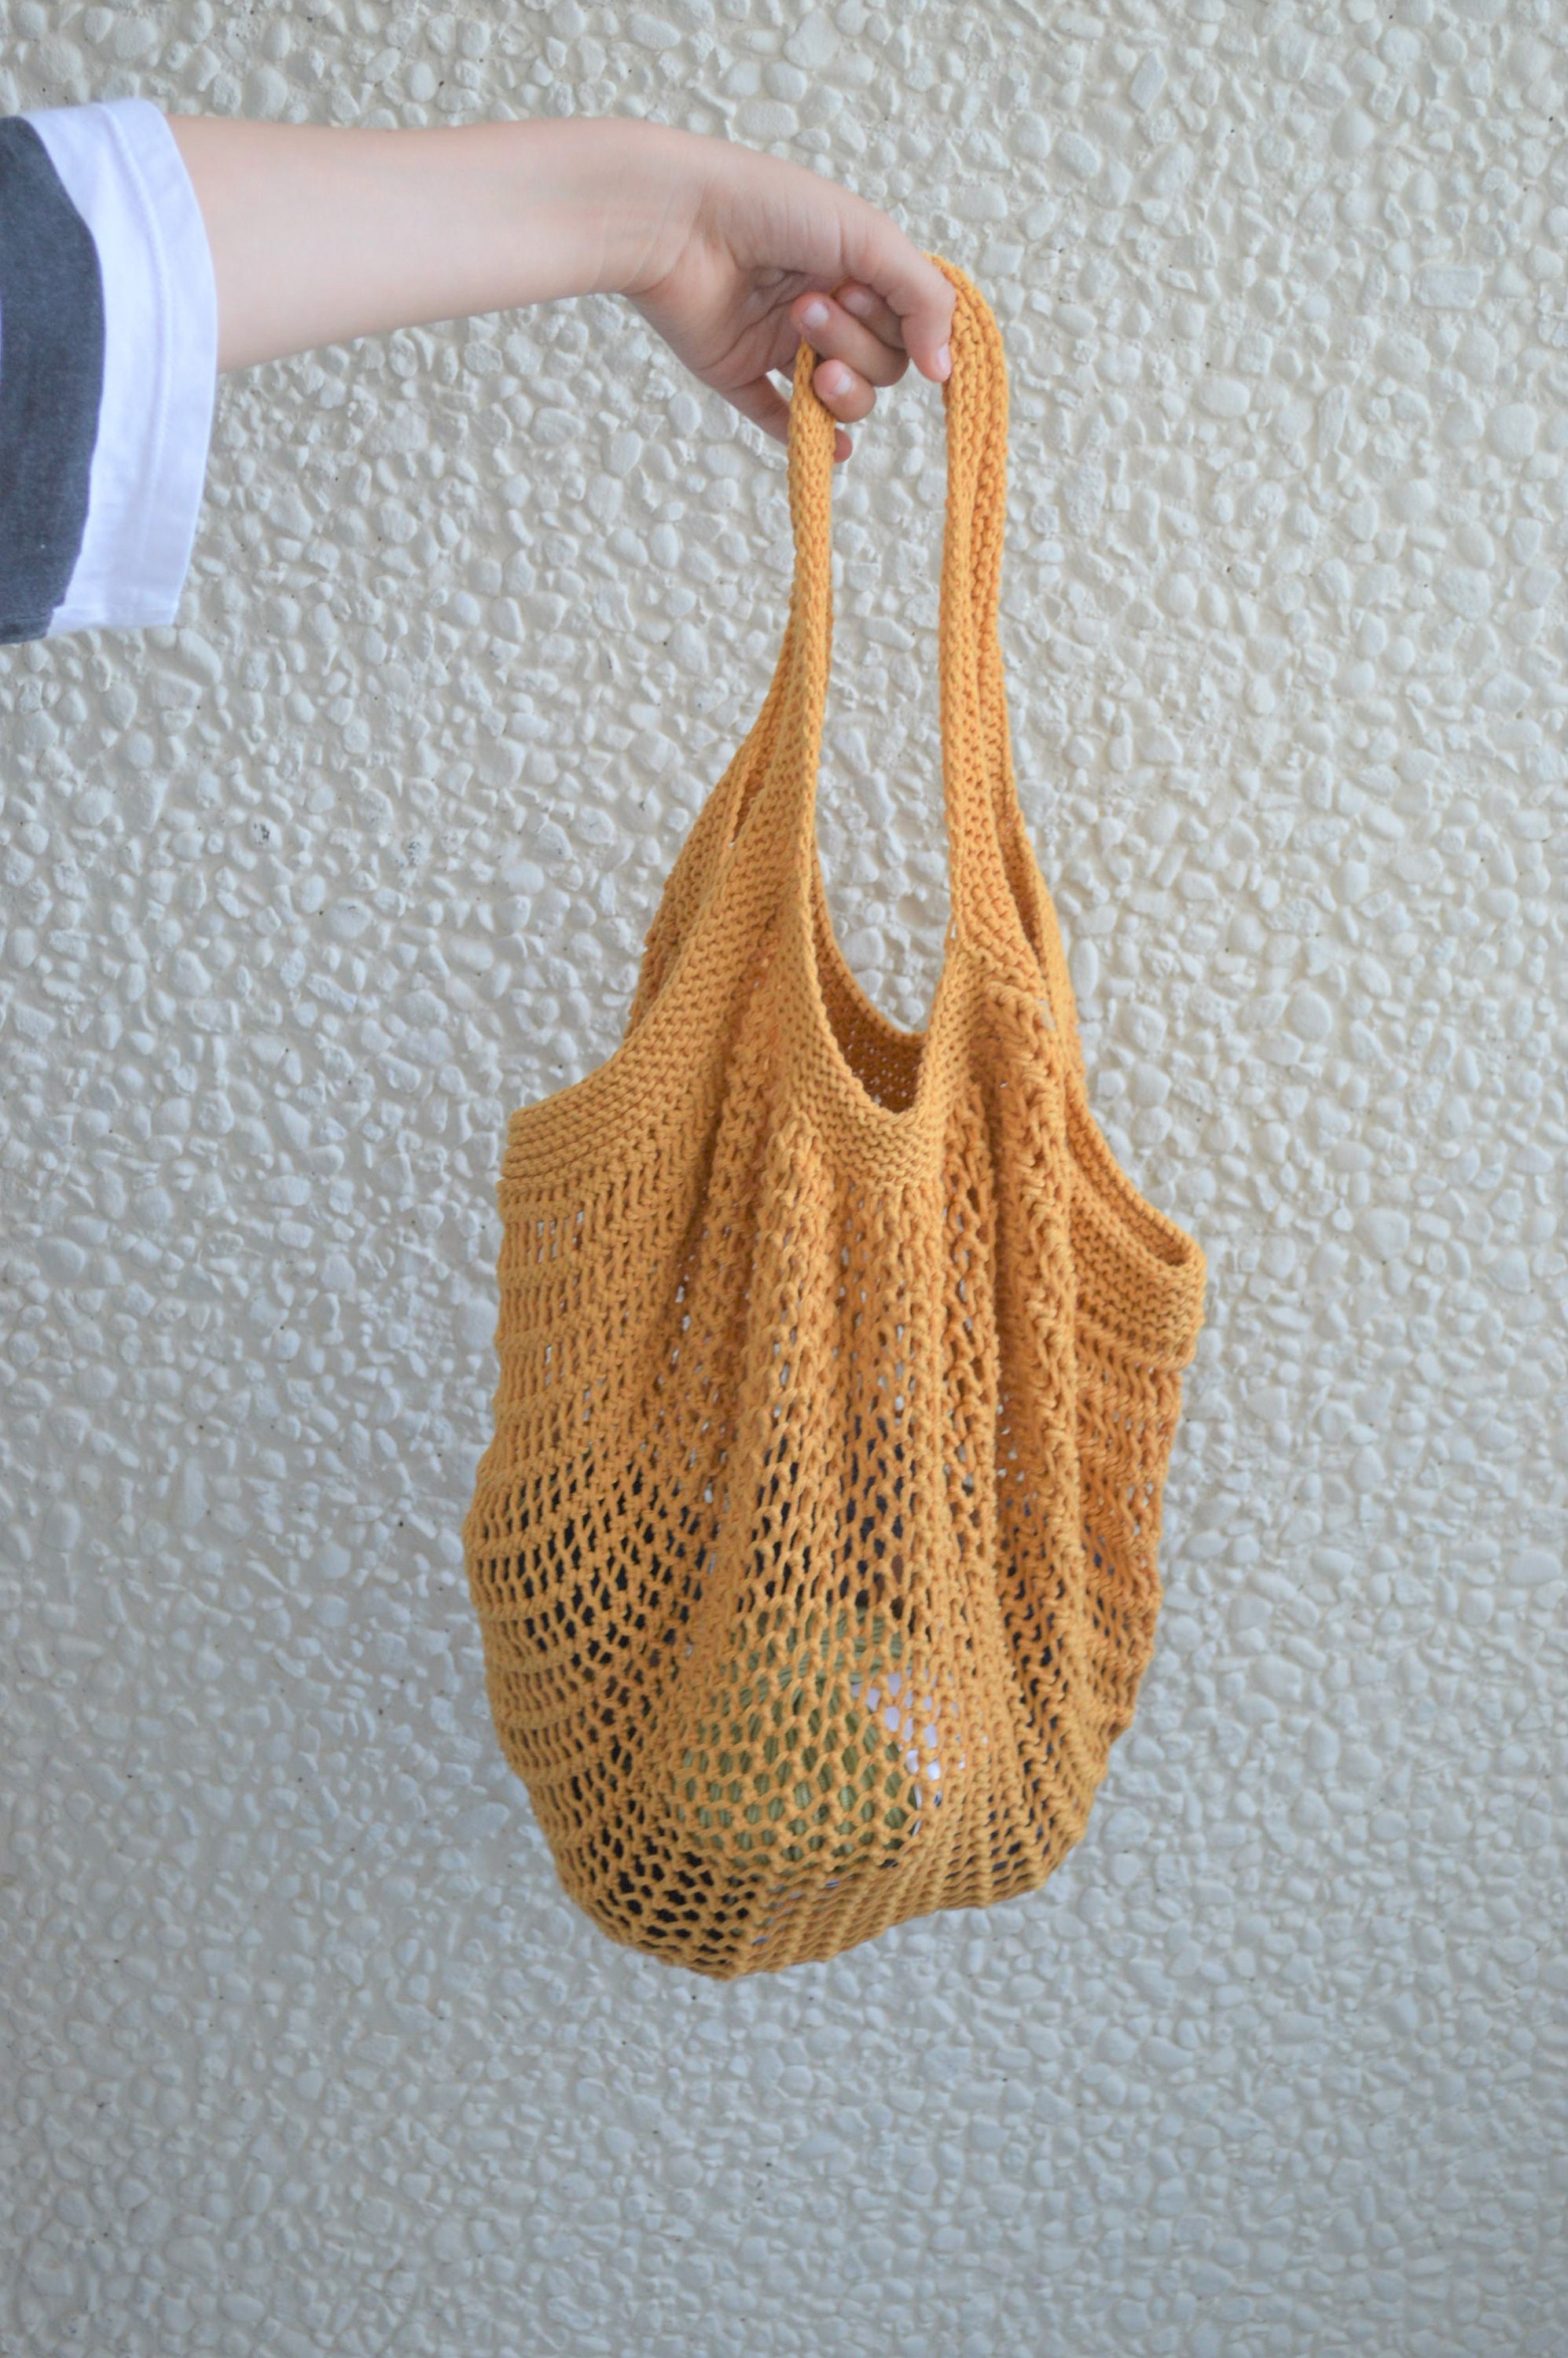 Knitting Aesthetic Tote Bag Cotton Tote Bag - Etsy